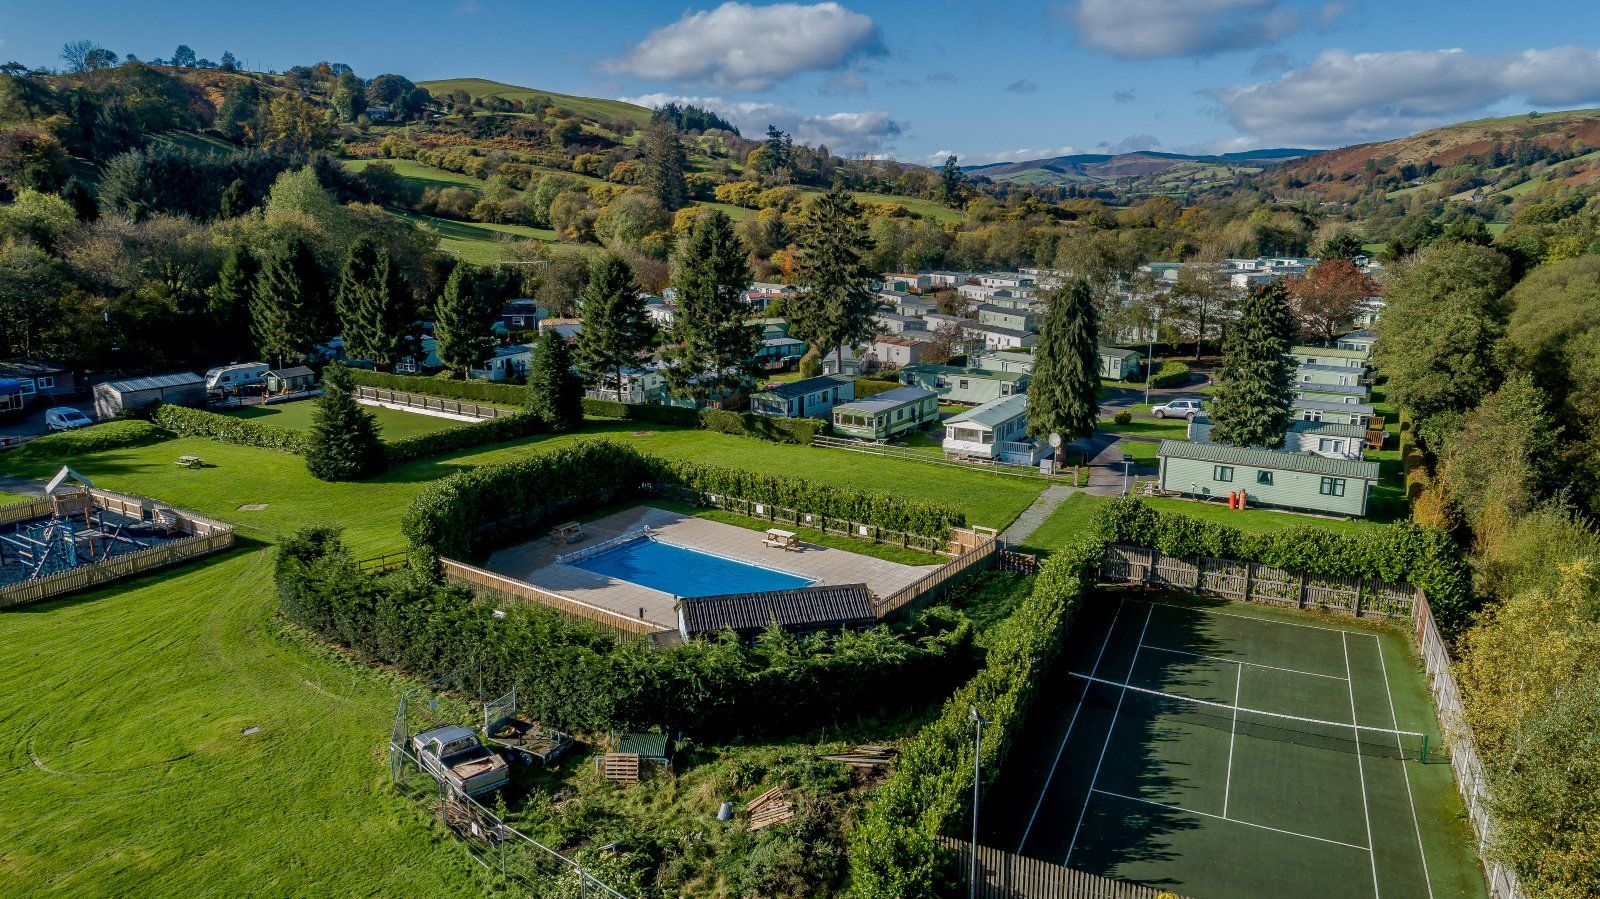 swimming pool and tennis court